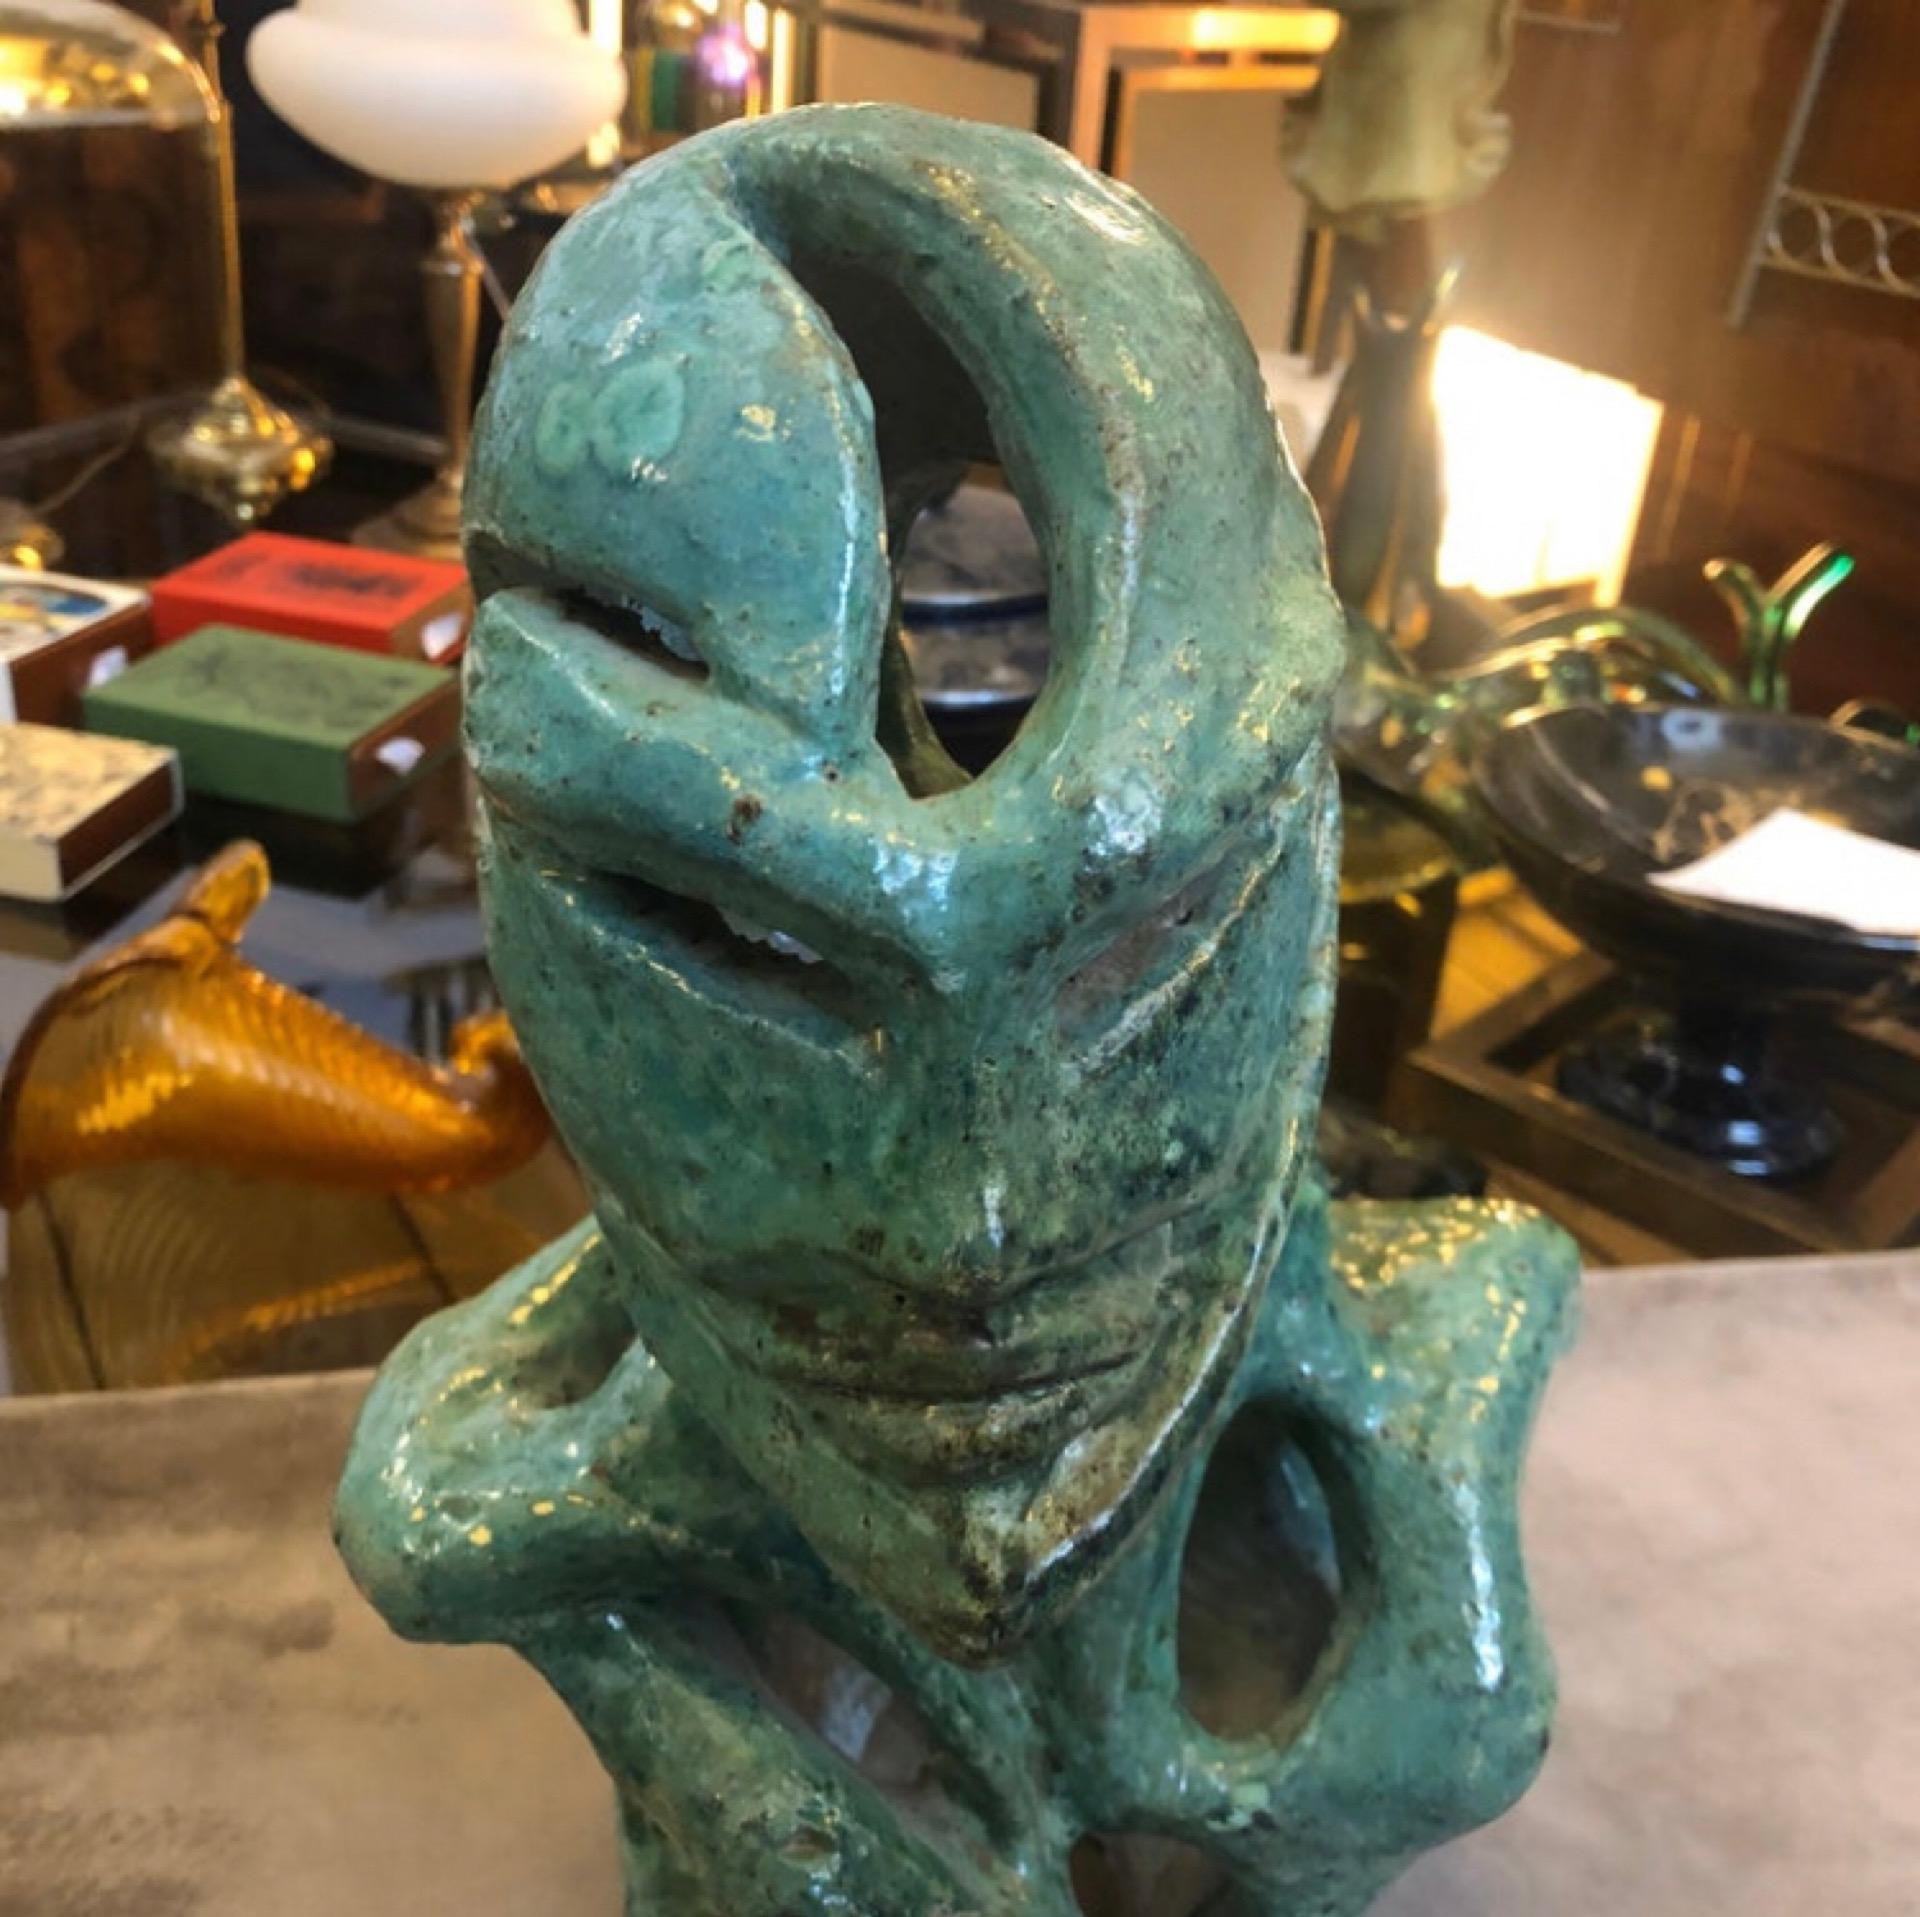 A unique piece Futurist green ceramic figure, made in Italy in the 1930s. It's signed Sofia and it's in good conditions overall. The Bust Sculpture is a beautiful and unique piece of Italian art that reflects the Futurist movement of the early 20th